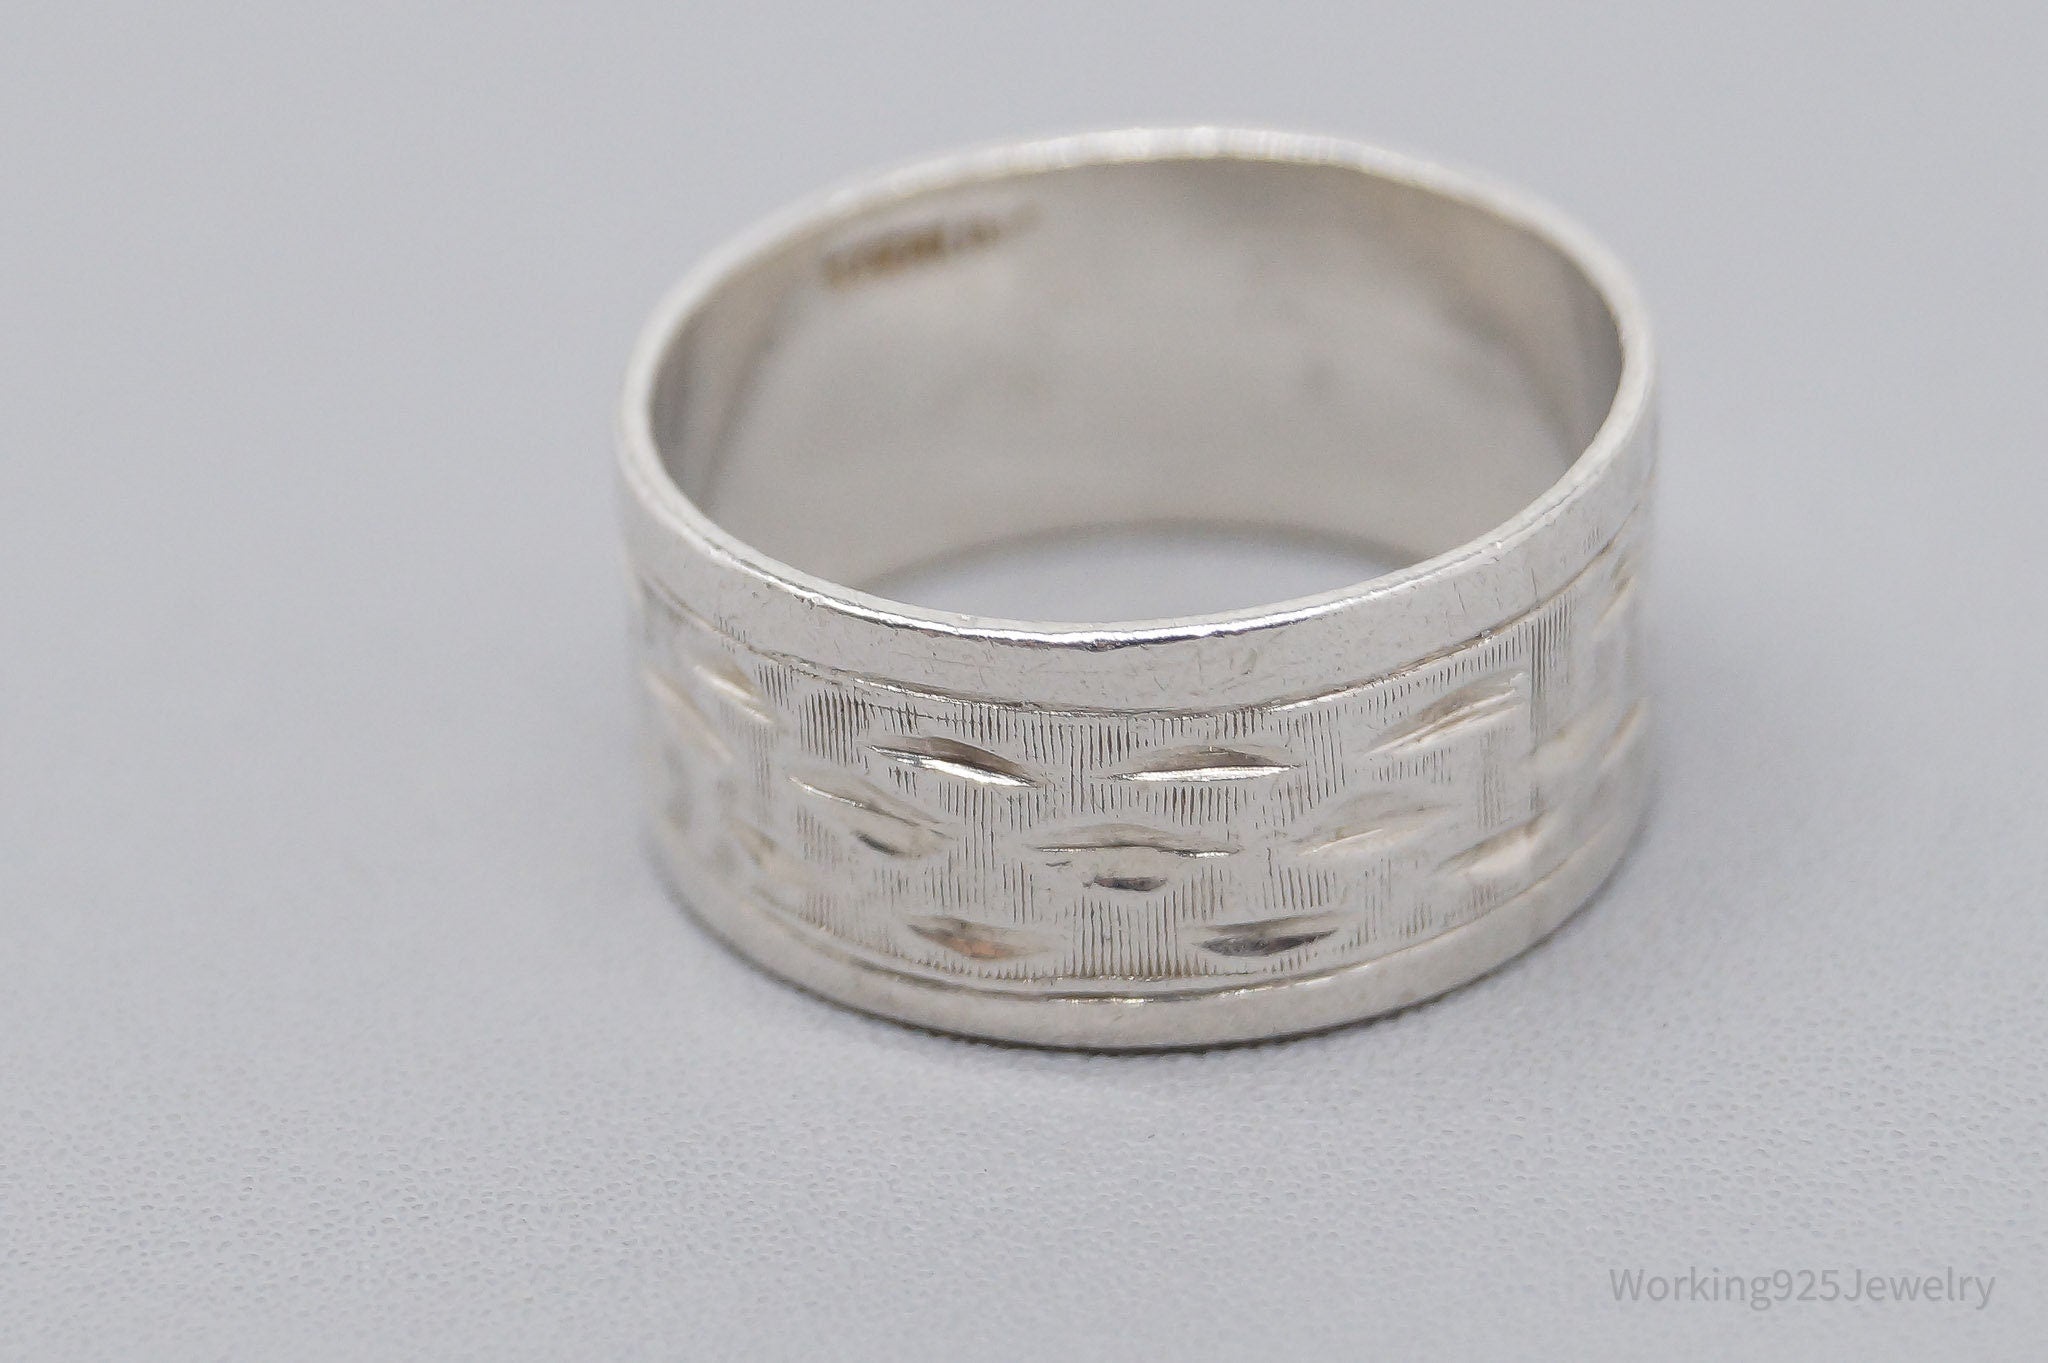 Antique Sterling Silver Band Ring - Size 6.25